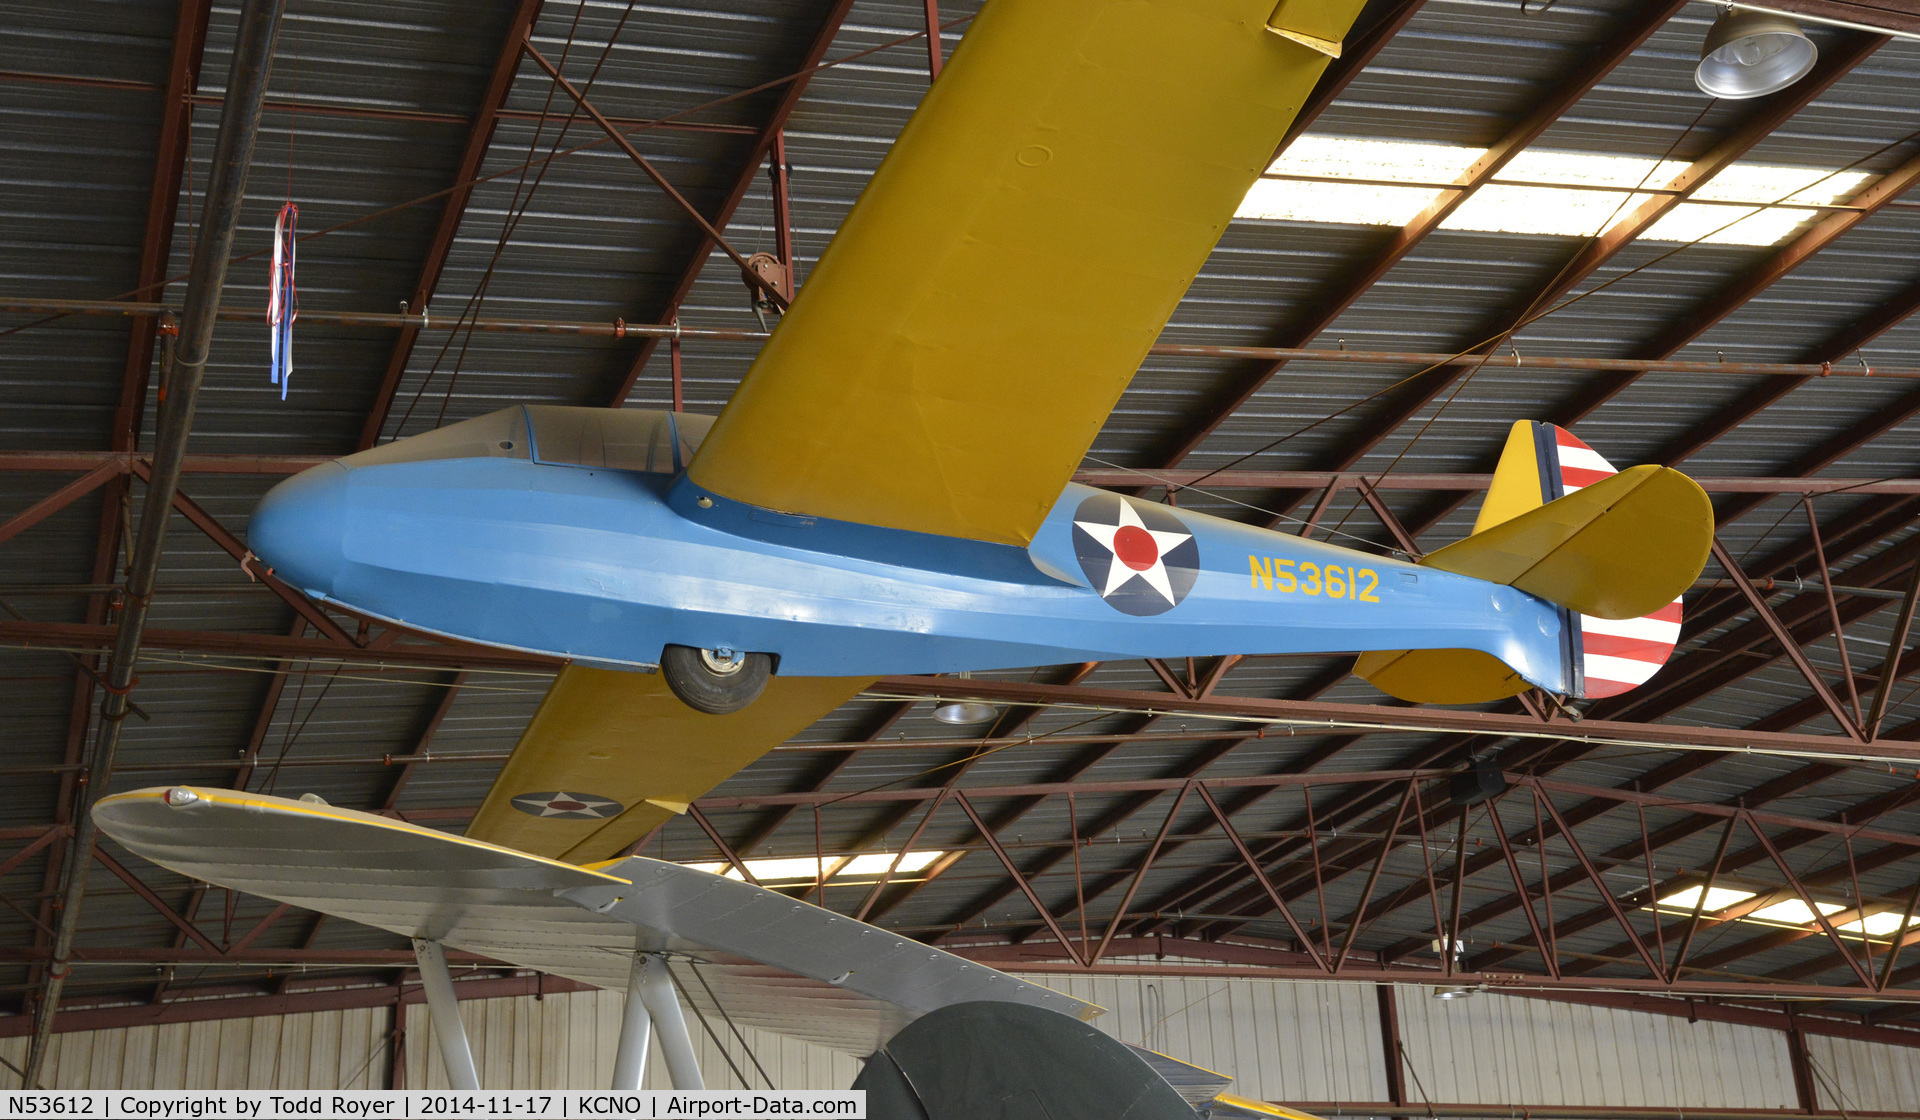 N53612, 1945 Laister-kauffman LK-10A C/N 9, On display at the Planes of Fame Chino location